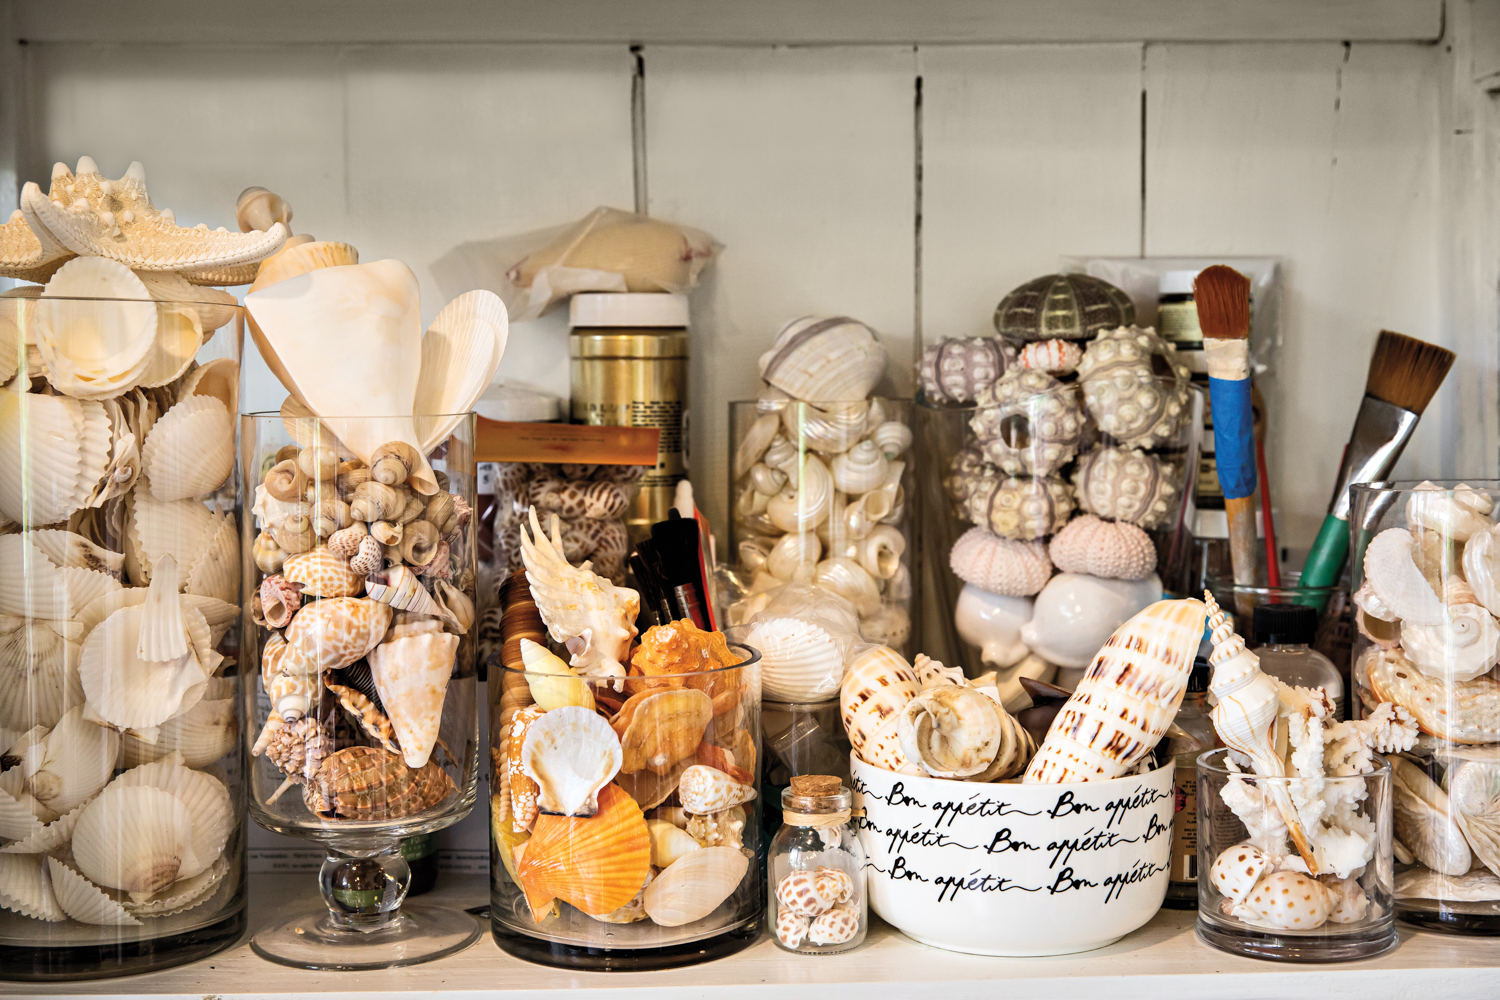 canisters of shells in kim delaney's studio